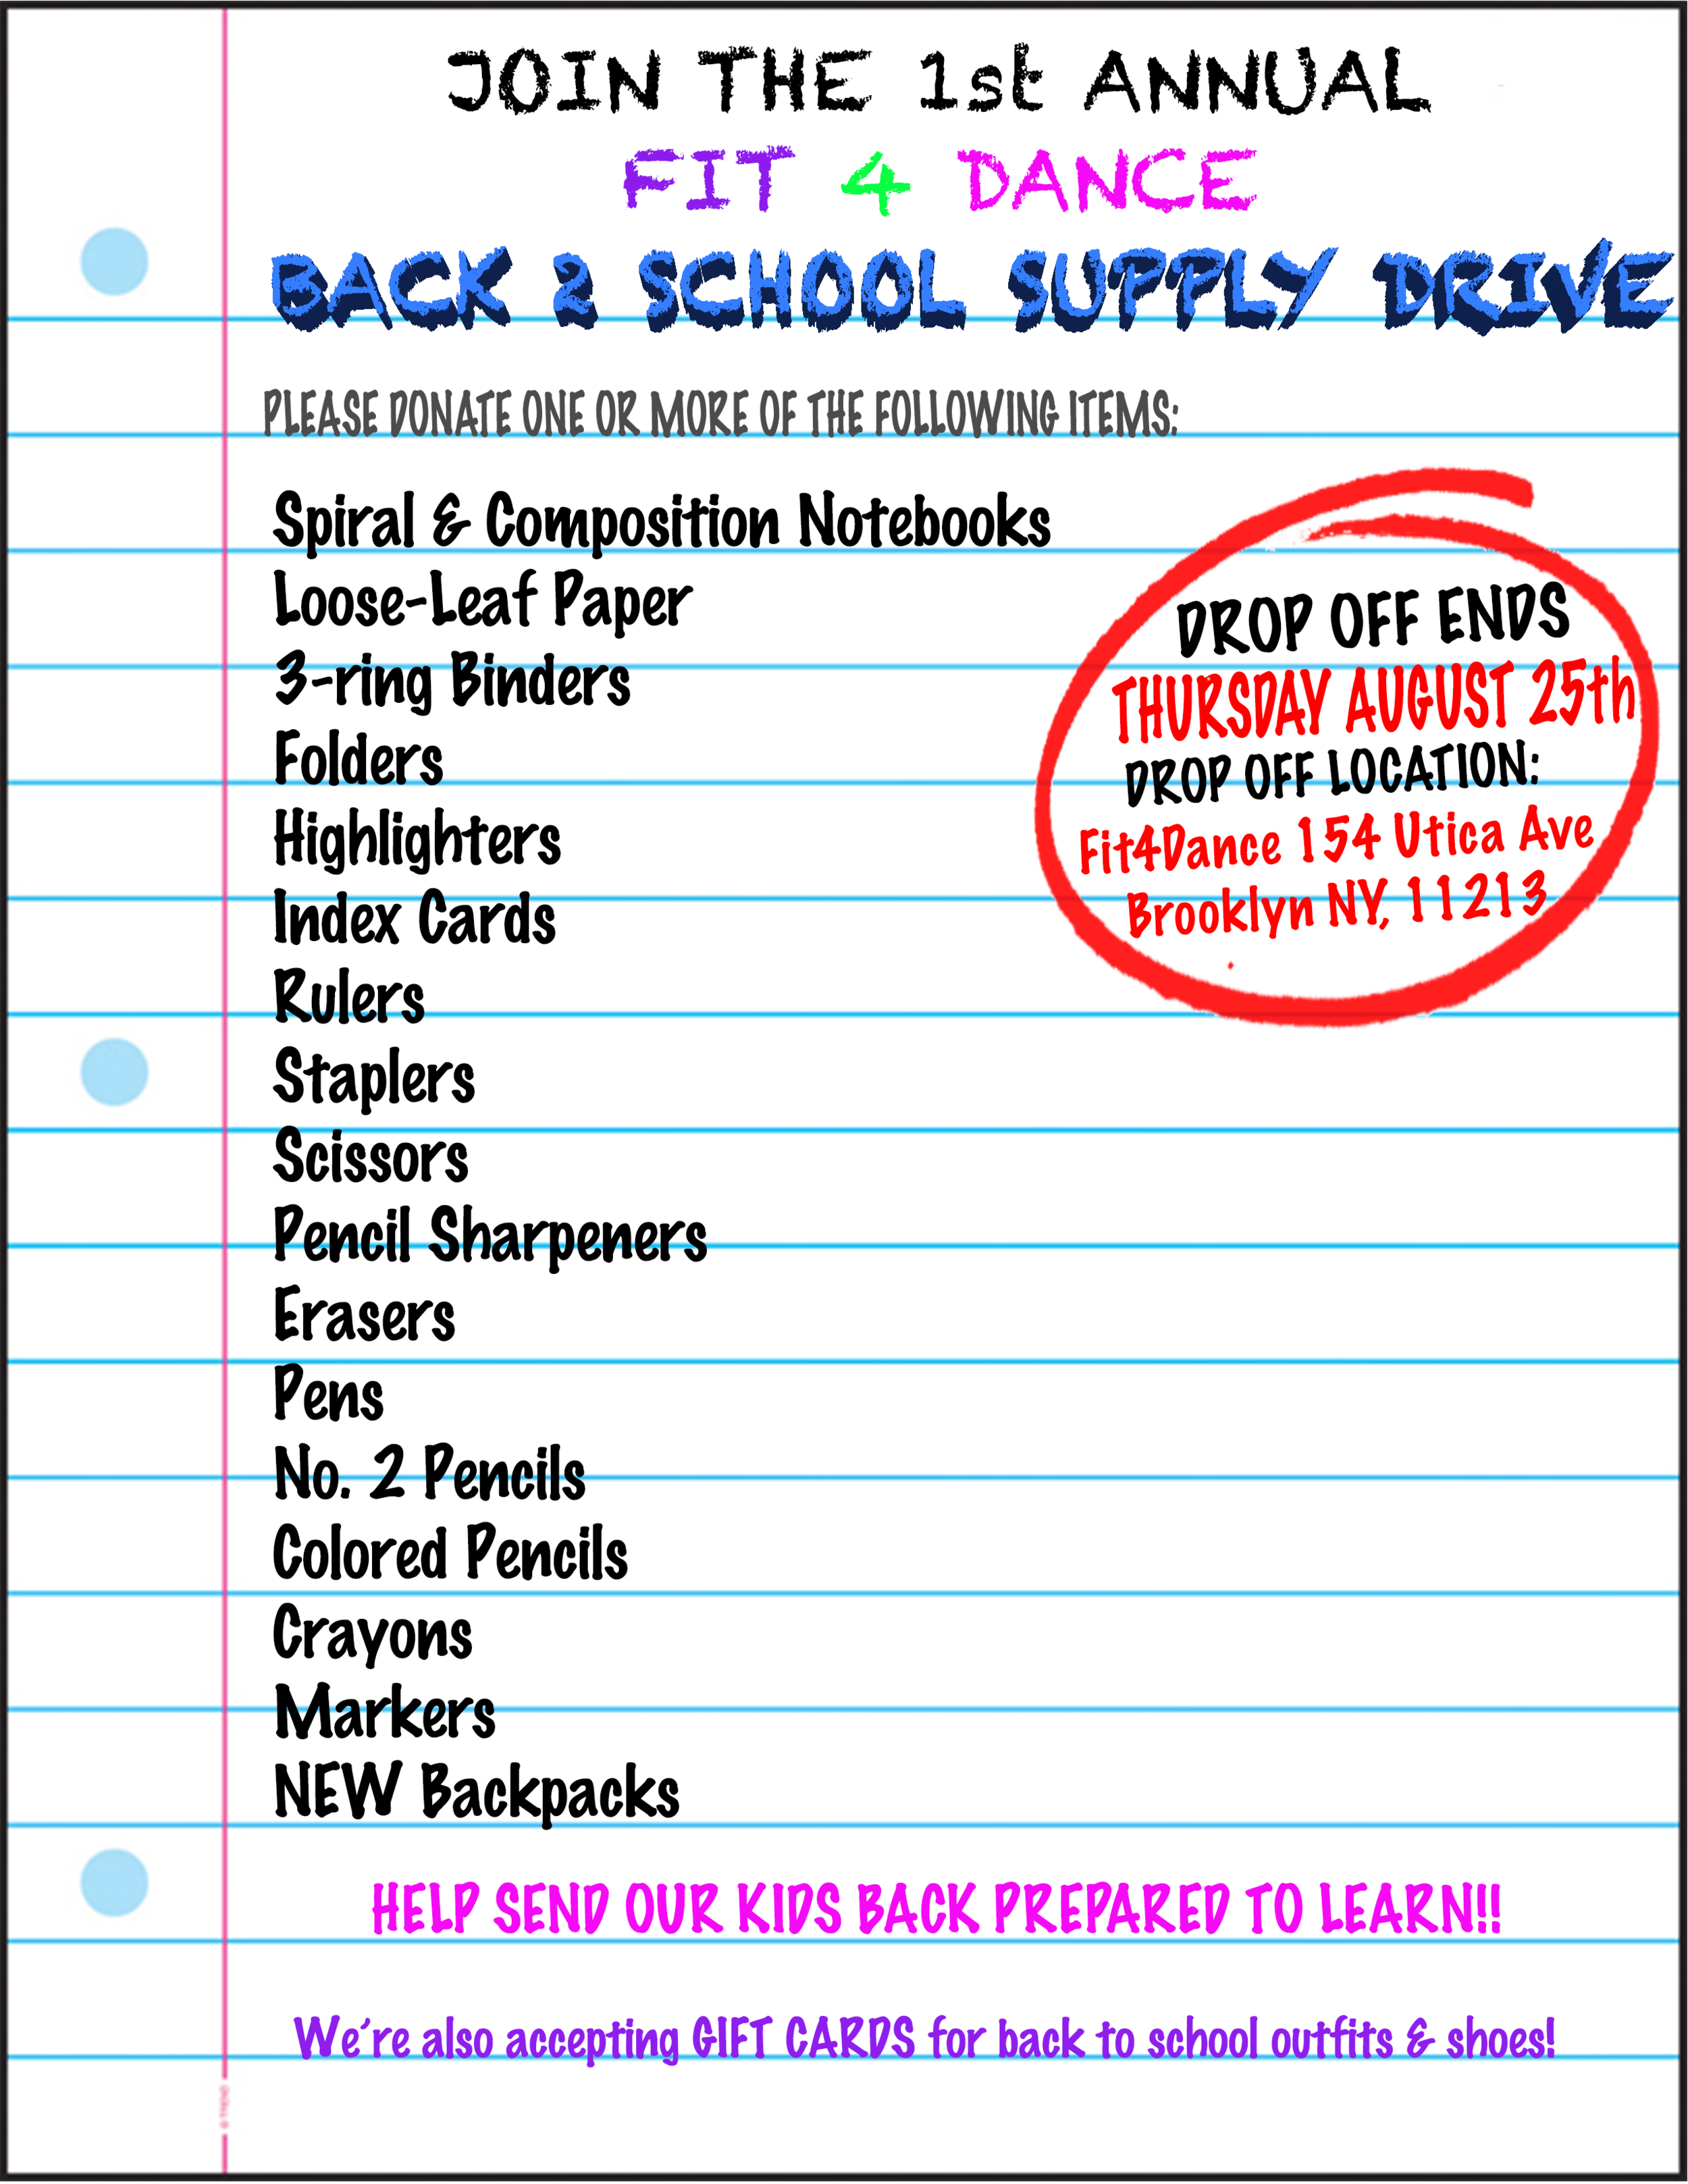 Fit4Dance & Breaktapes Hosts a Back to School Supply Drive